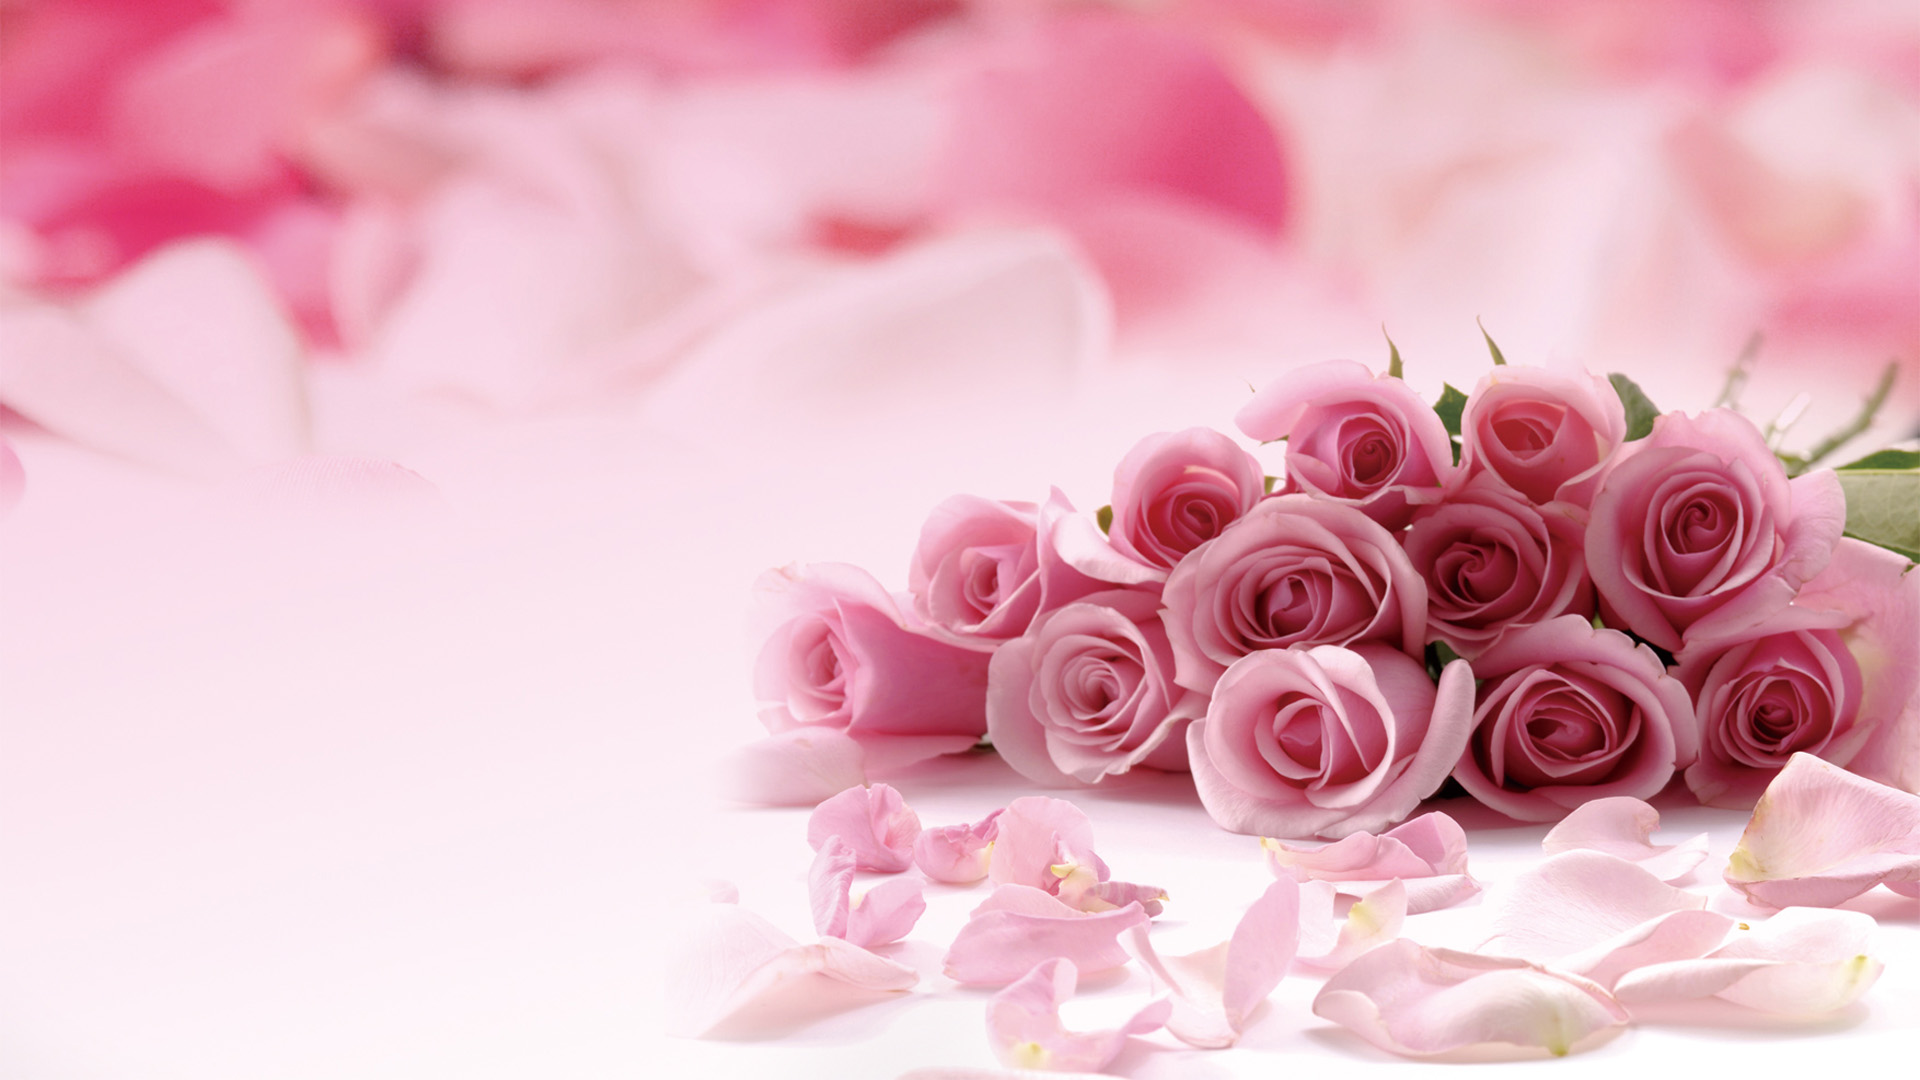 2012 Chinese Valentine's Day rose picture desktop wallpaper